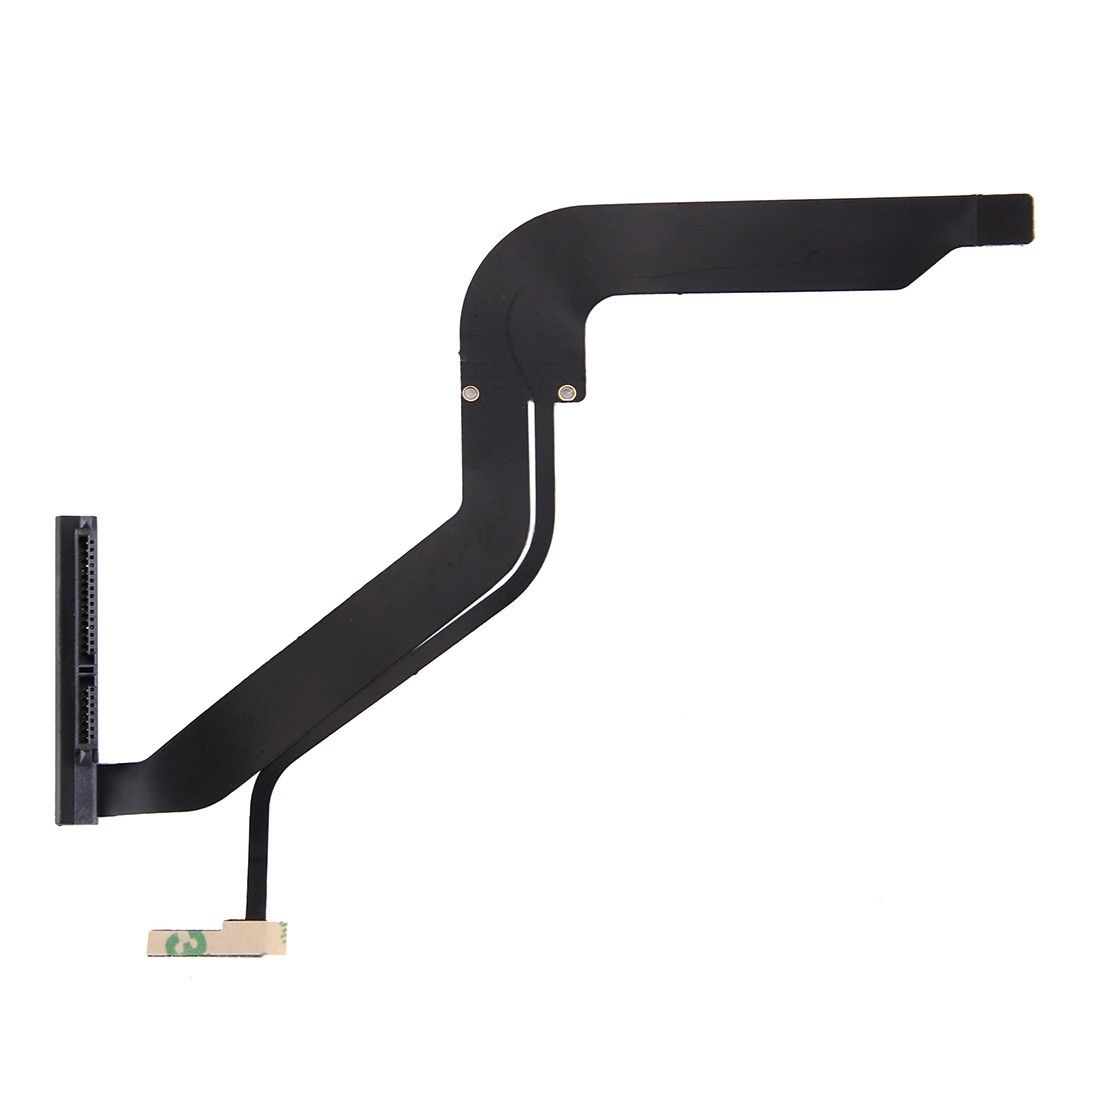 MacBook Pro 13" A1278 821-1480-A HDD Hard Drive Flex Cable for [product_price] - First Help Tech